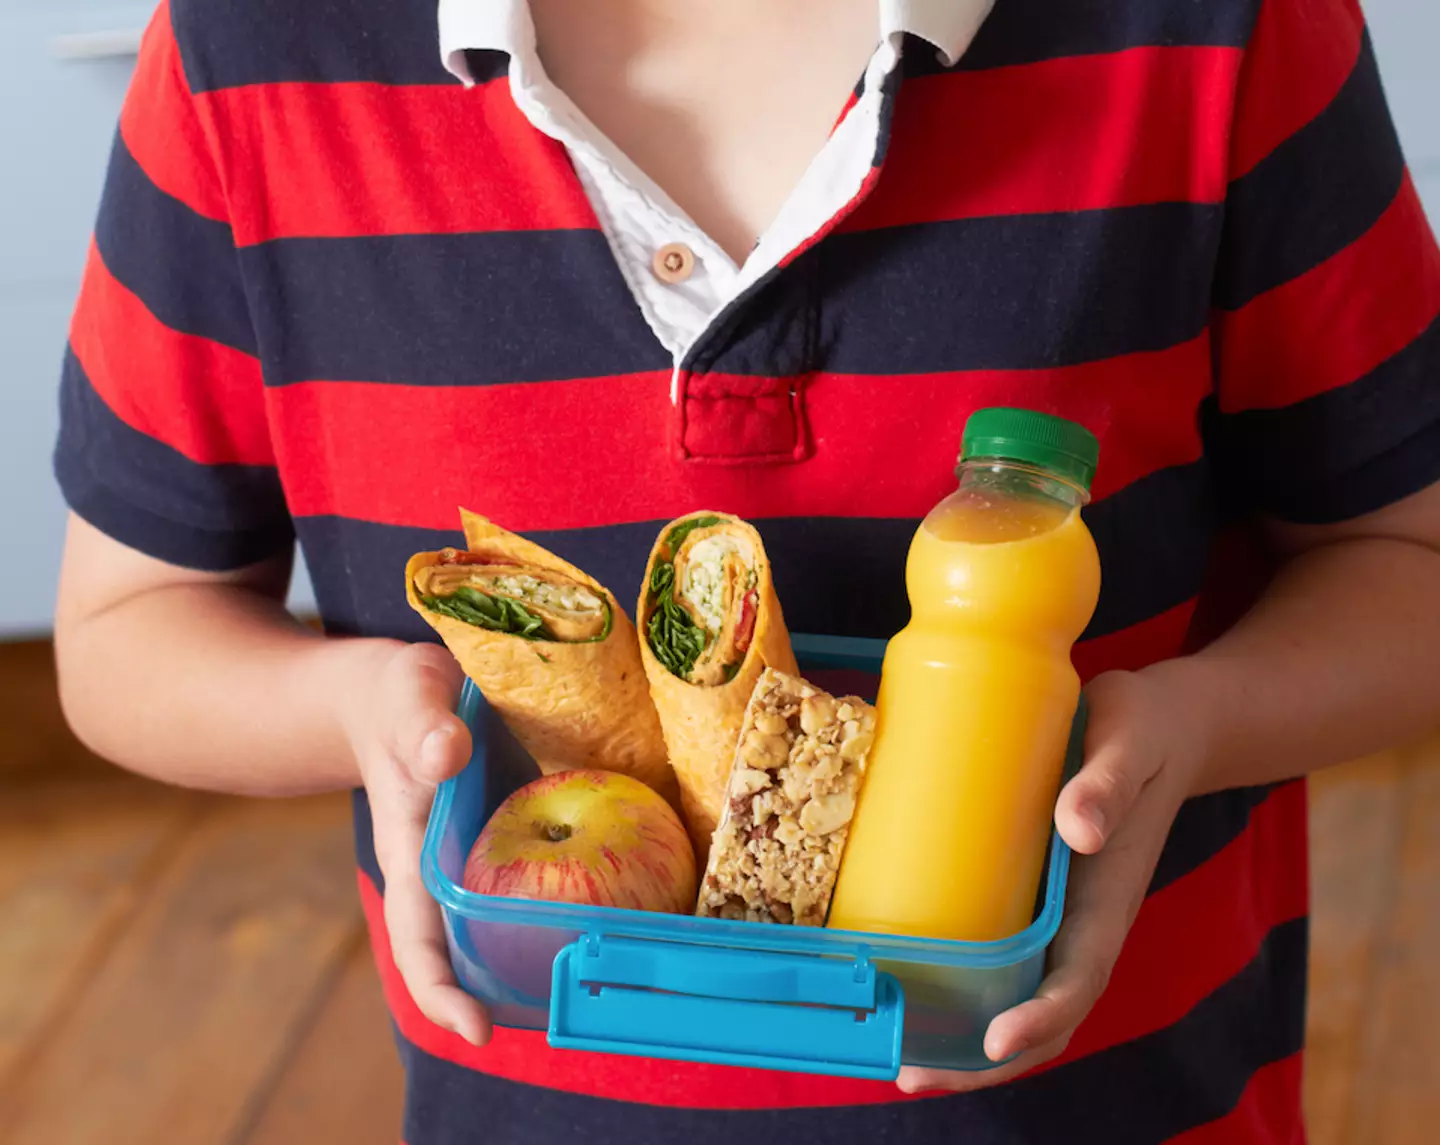 Parents debated whether putting meat in a lunch box during the summer was safe (